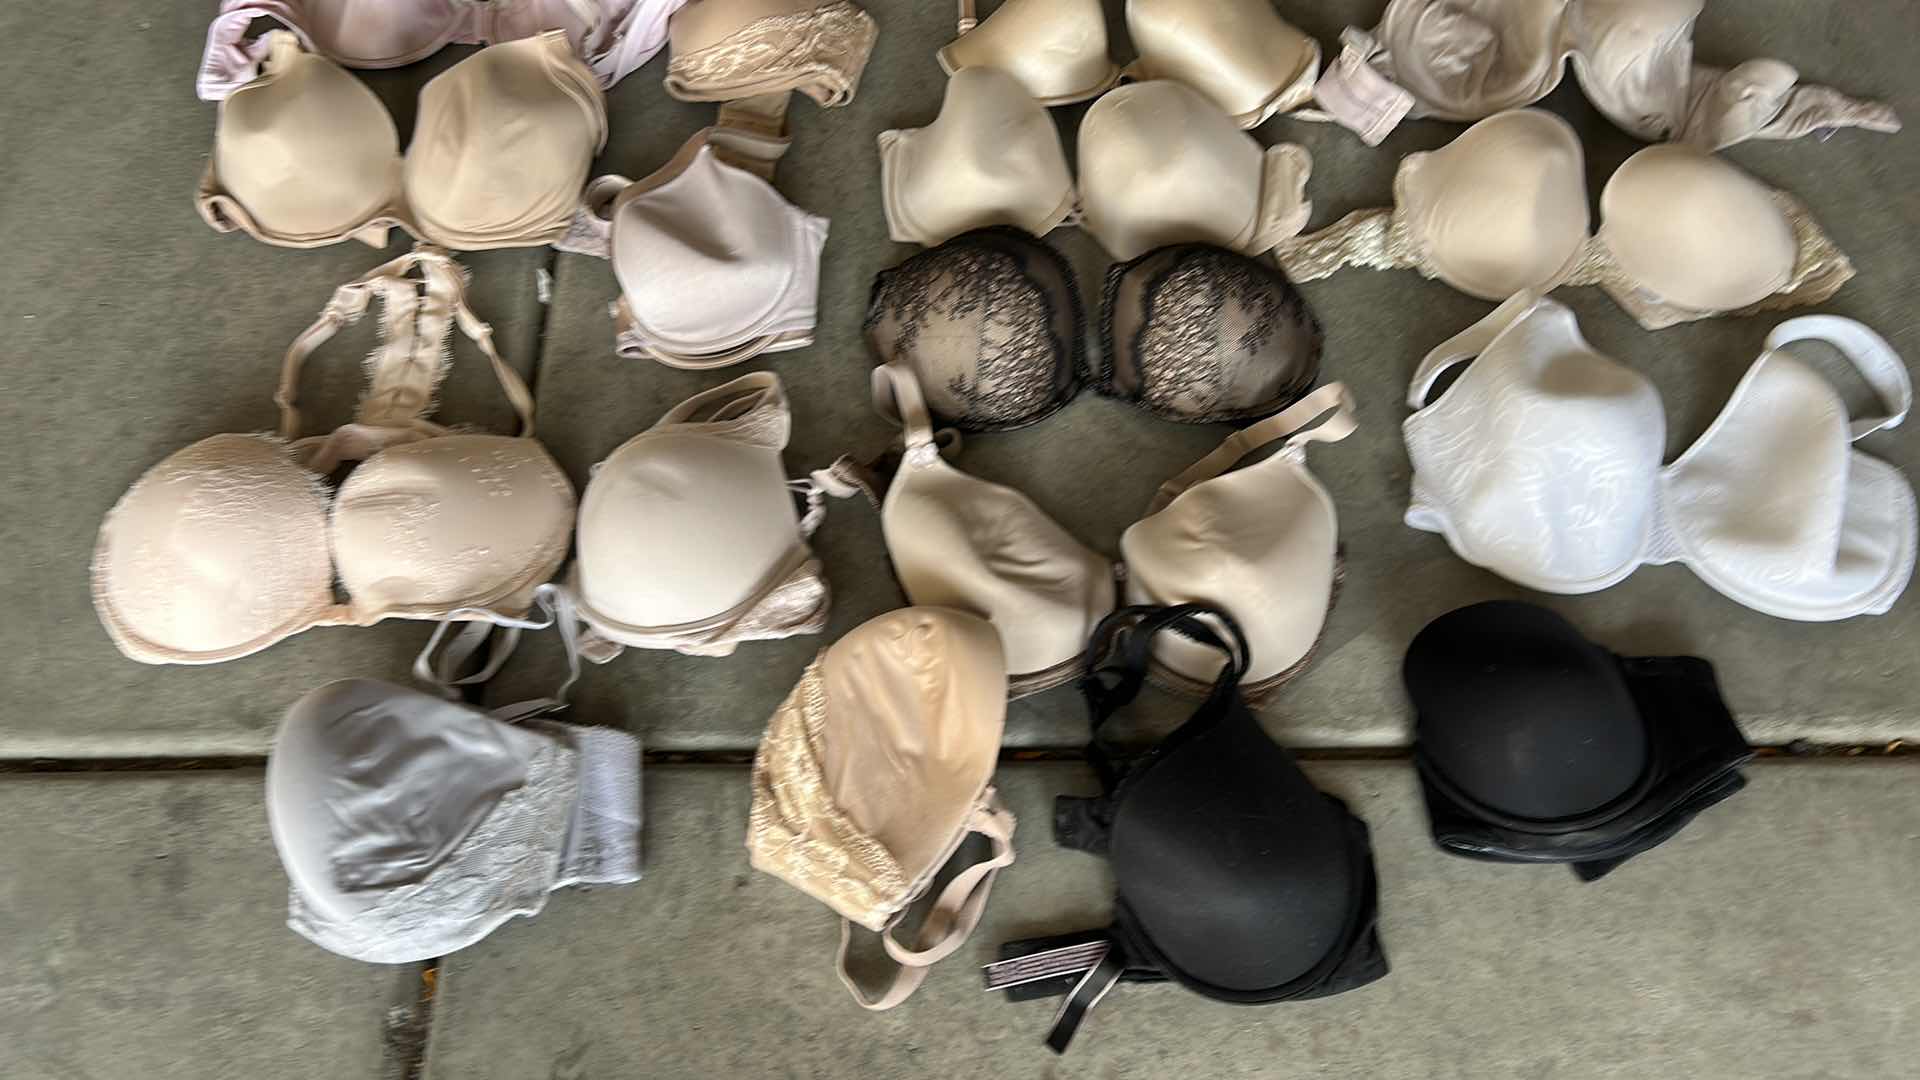 Photo 6 of WOMENS BRAS 36C AND D